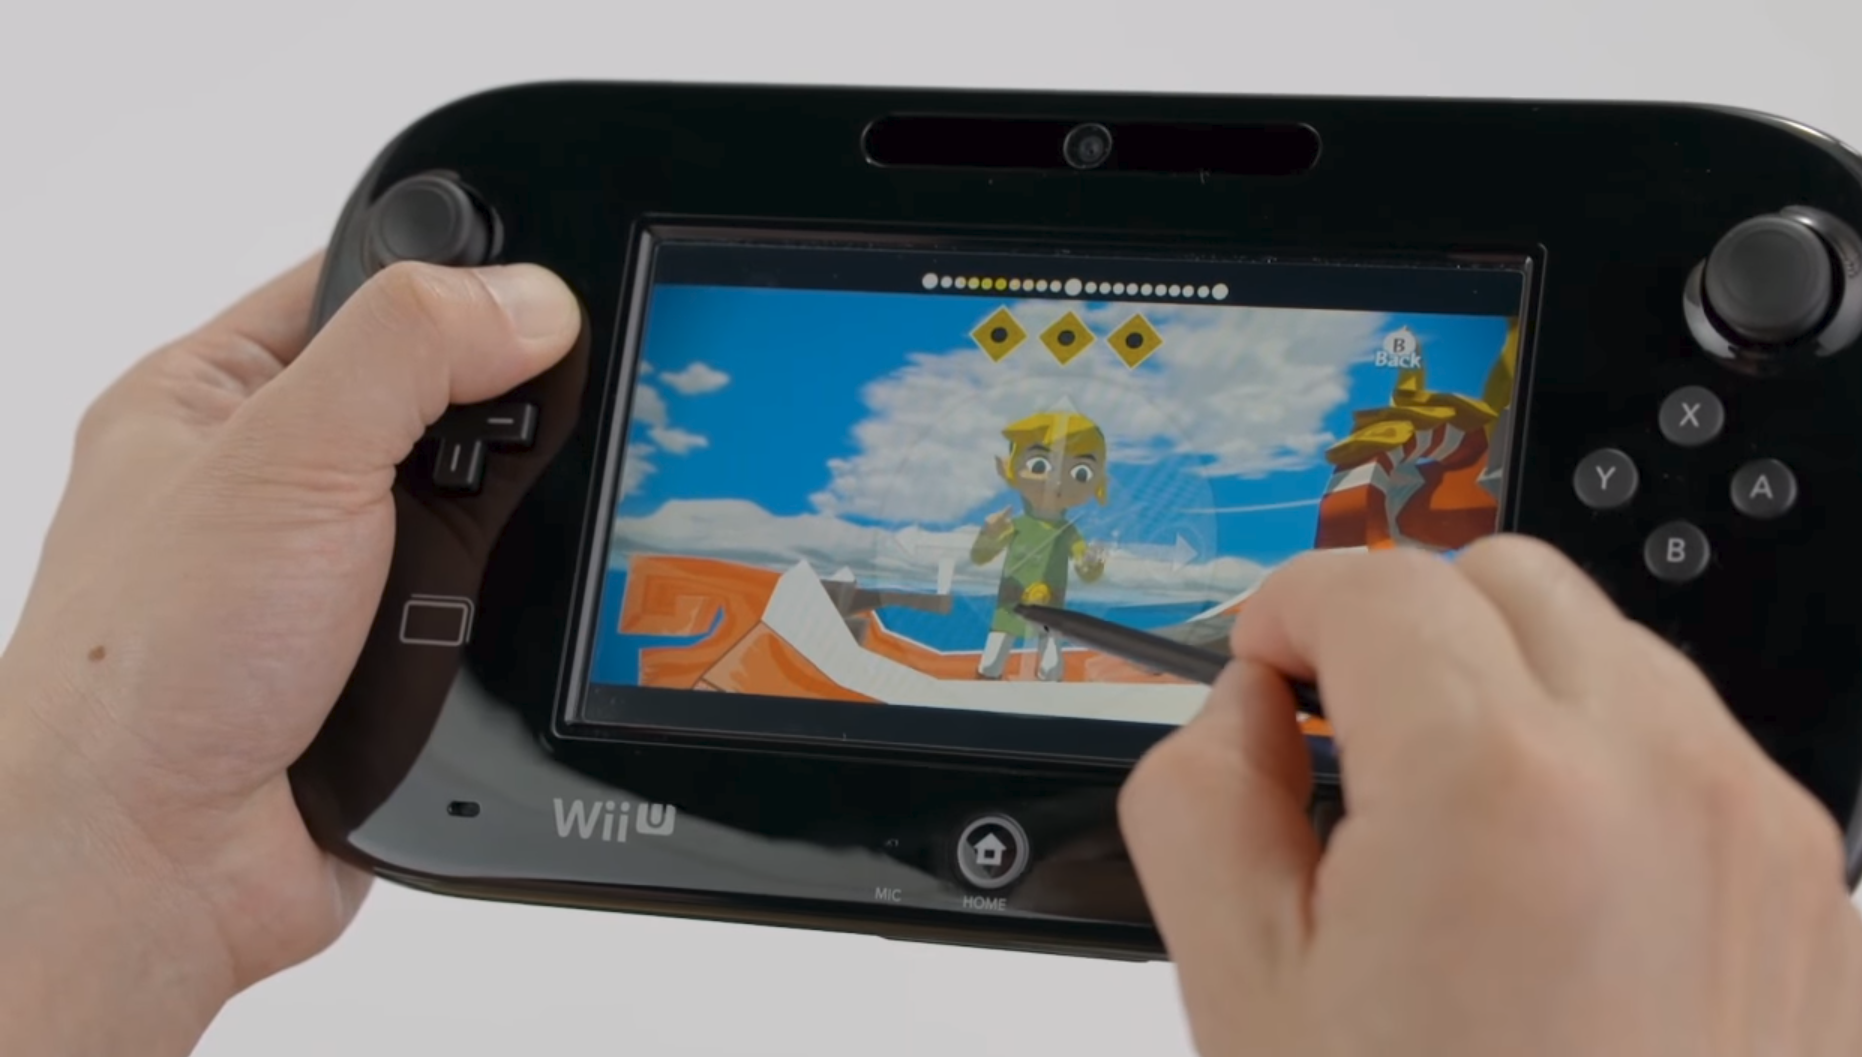 Black Wii U Console to be Phased Out in Japan